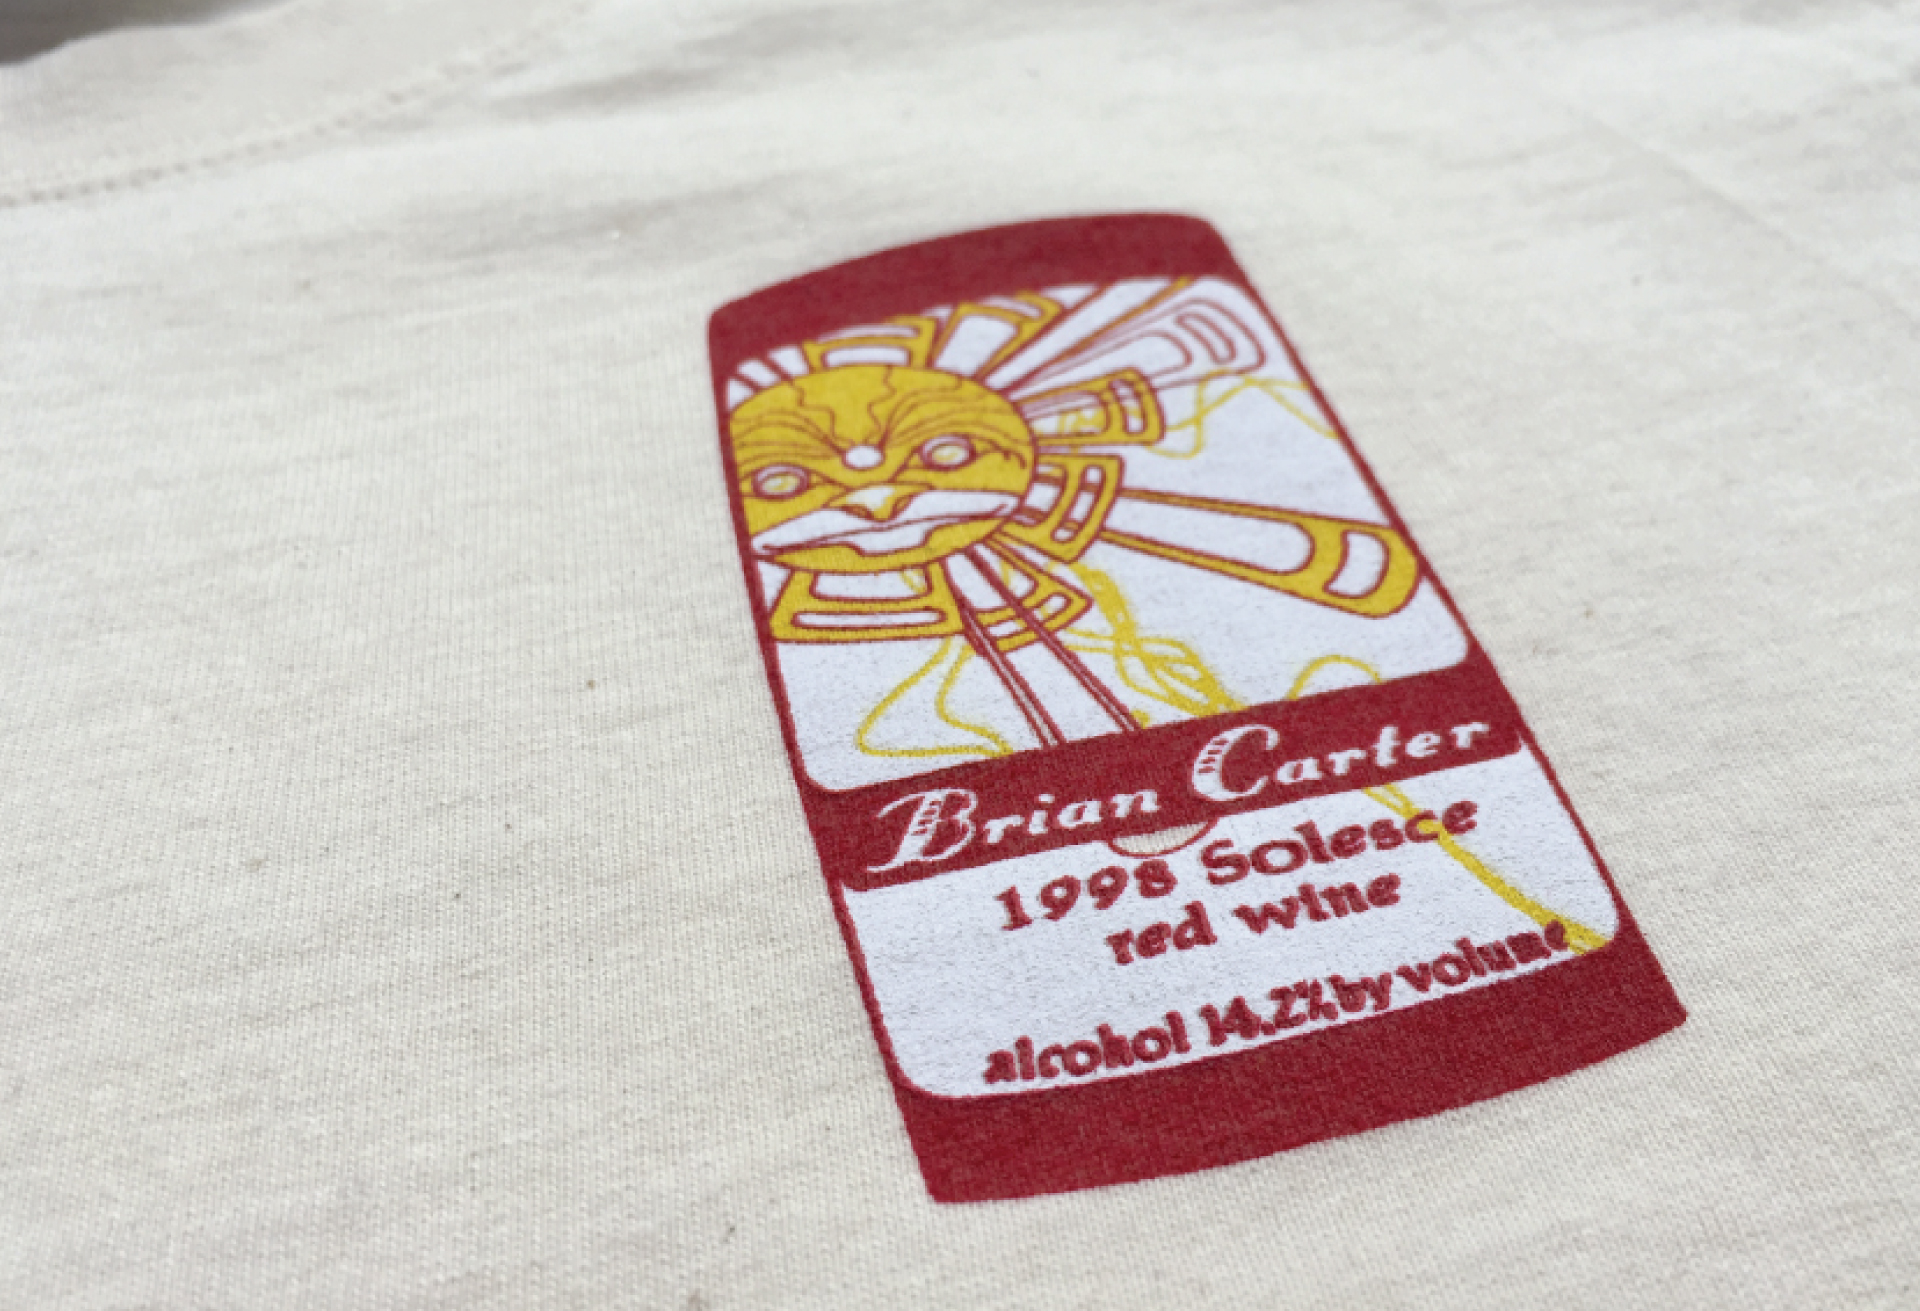 Brian Carter Cellars T-Shirt screen printed by Ontra Marketing Group